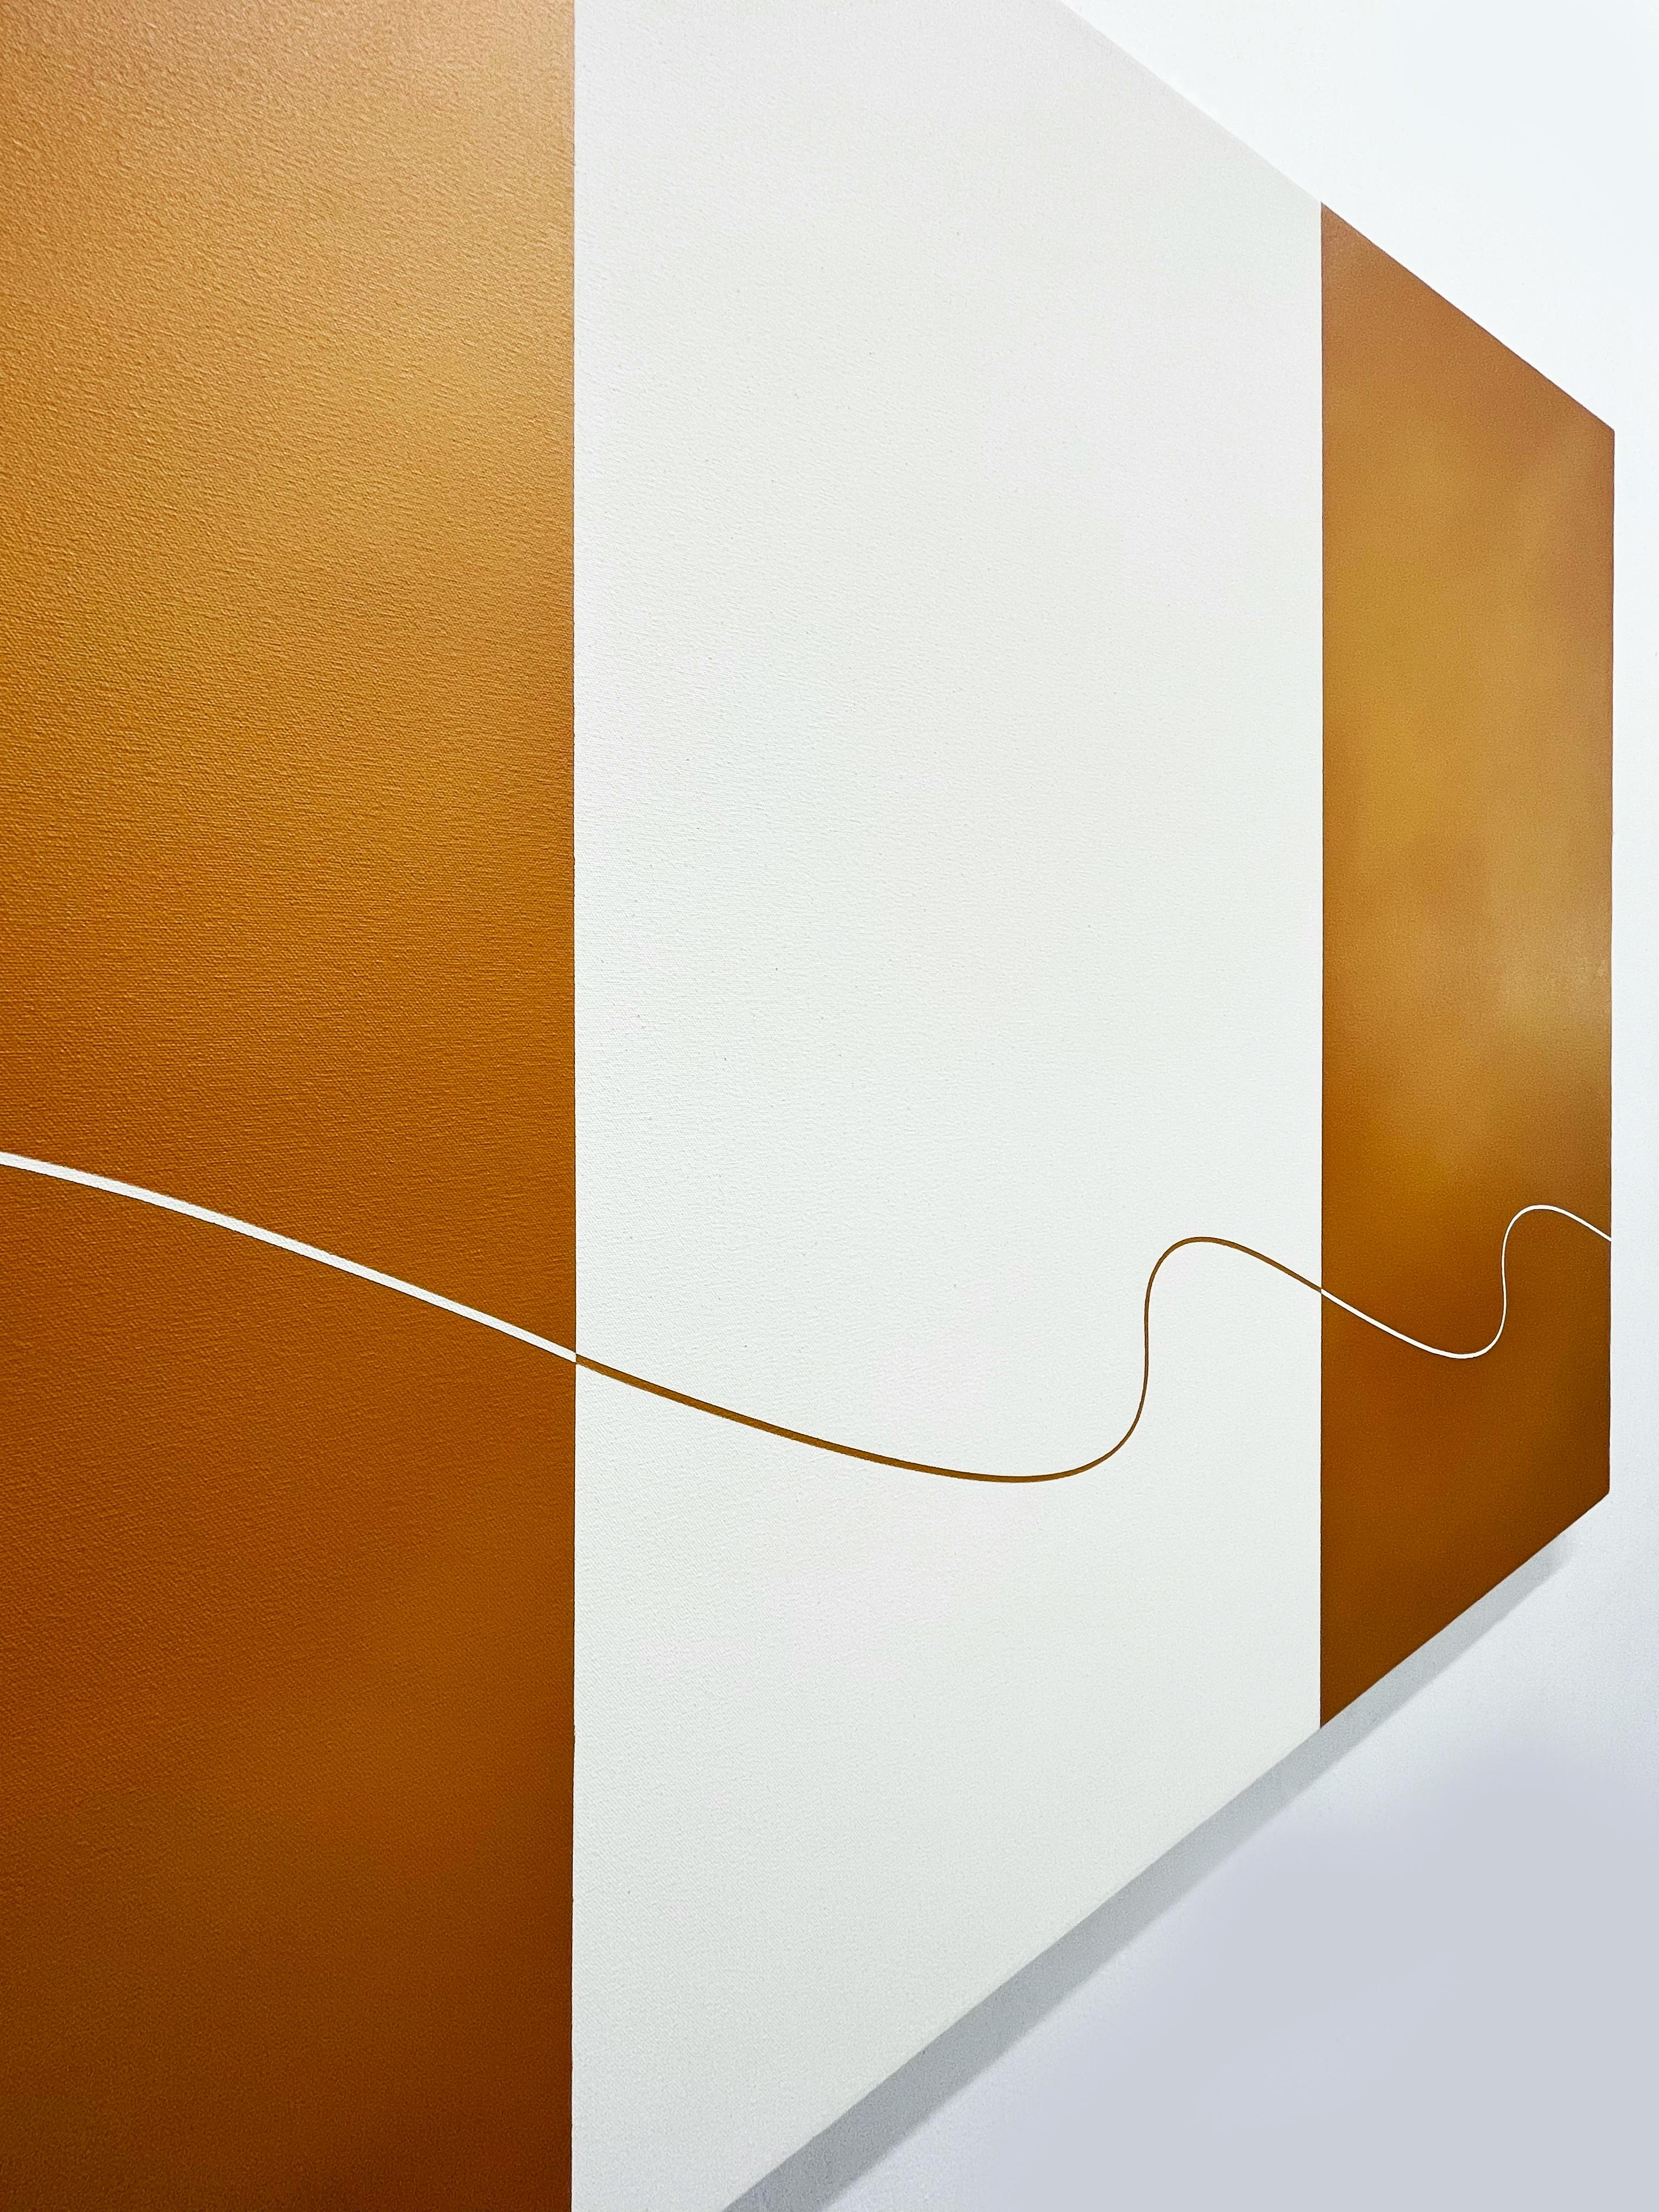 A close-up of a striped, orange and white painting by artist Senem Oezdogan.